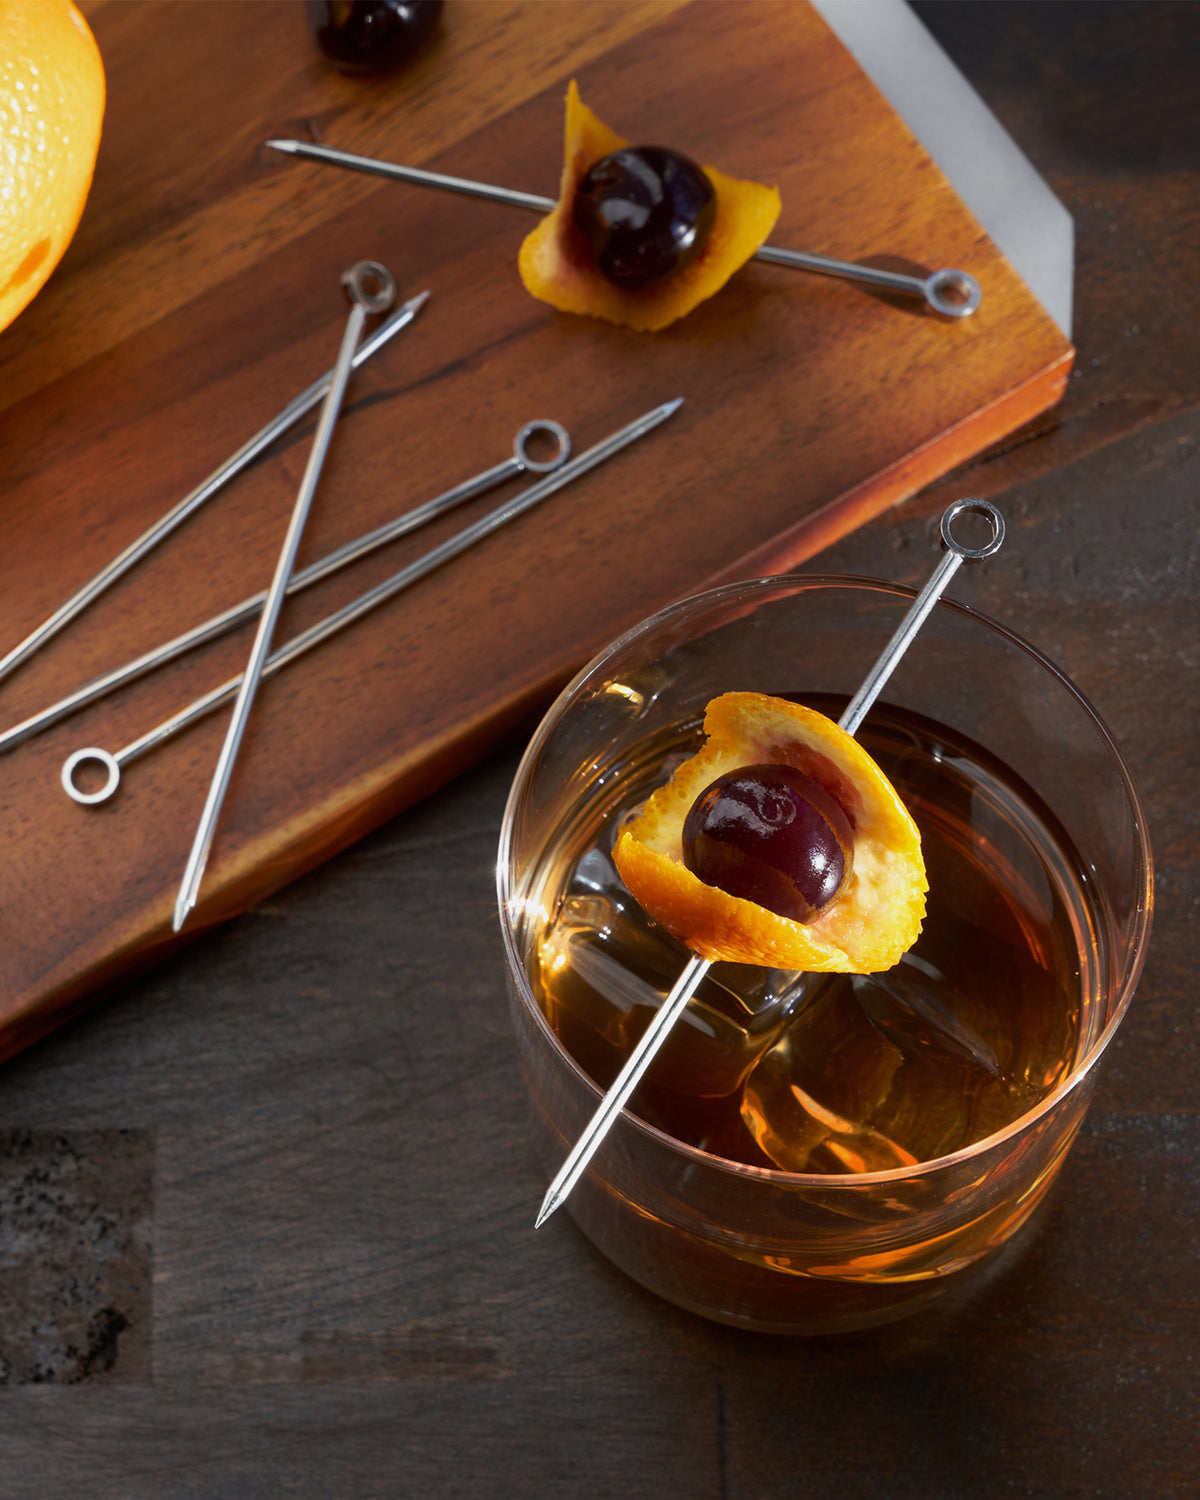 Stainless Steel Cocktail Picks